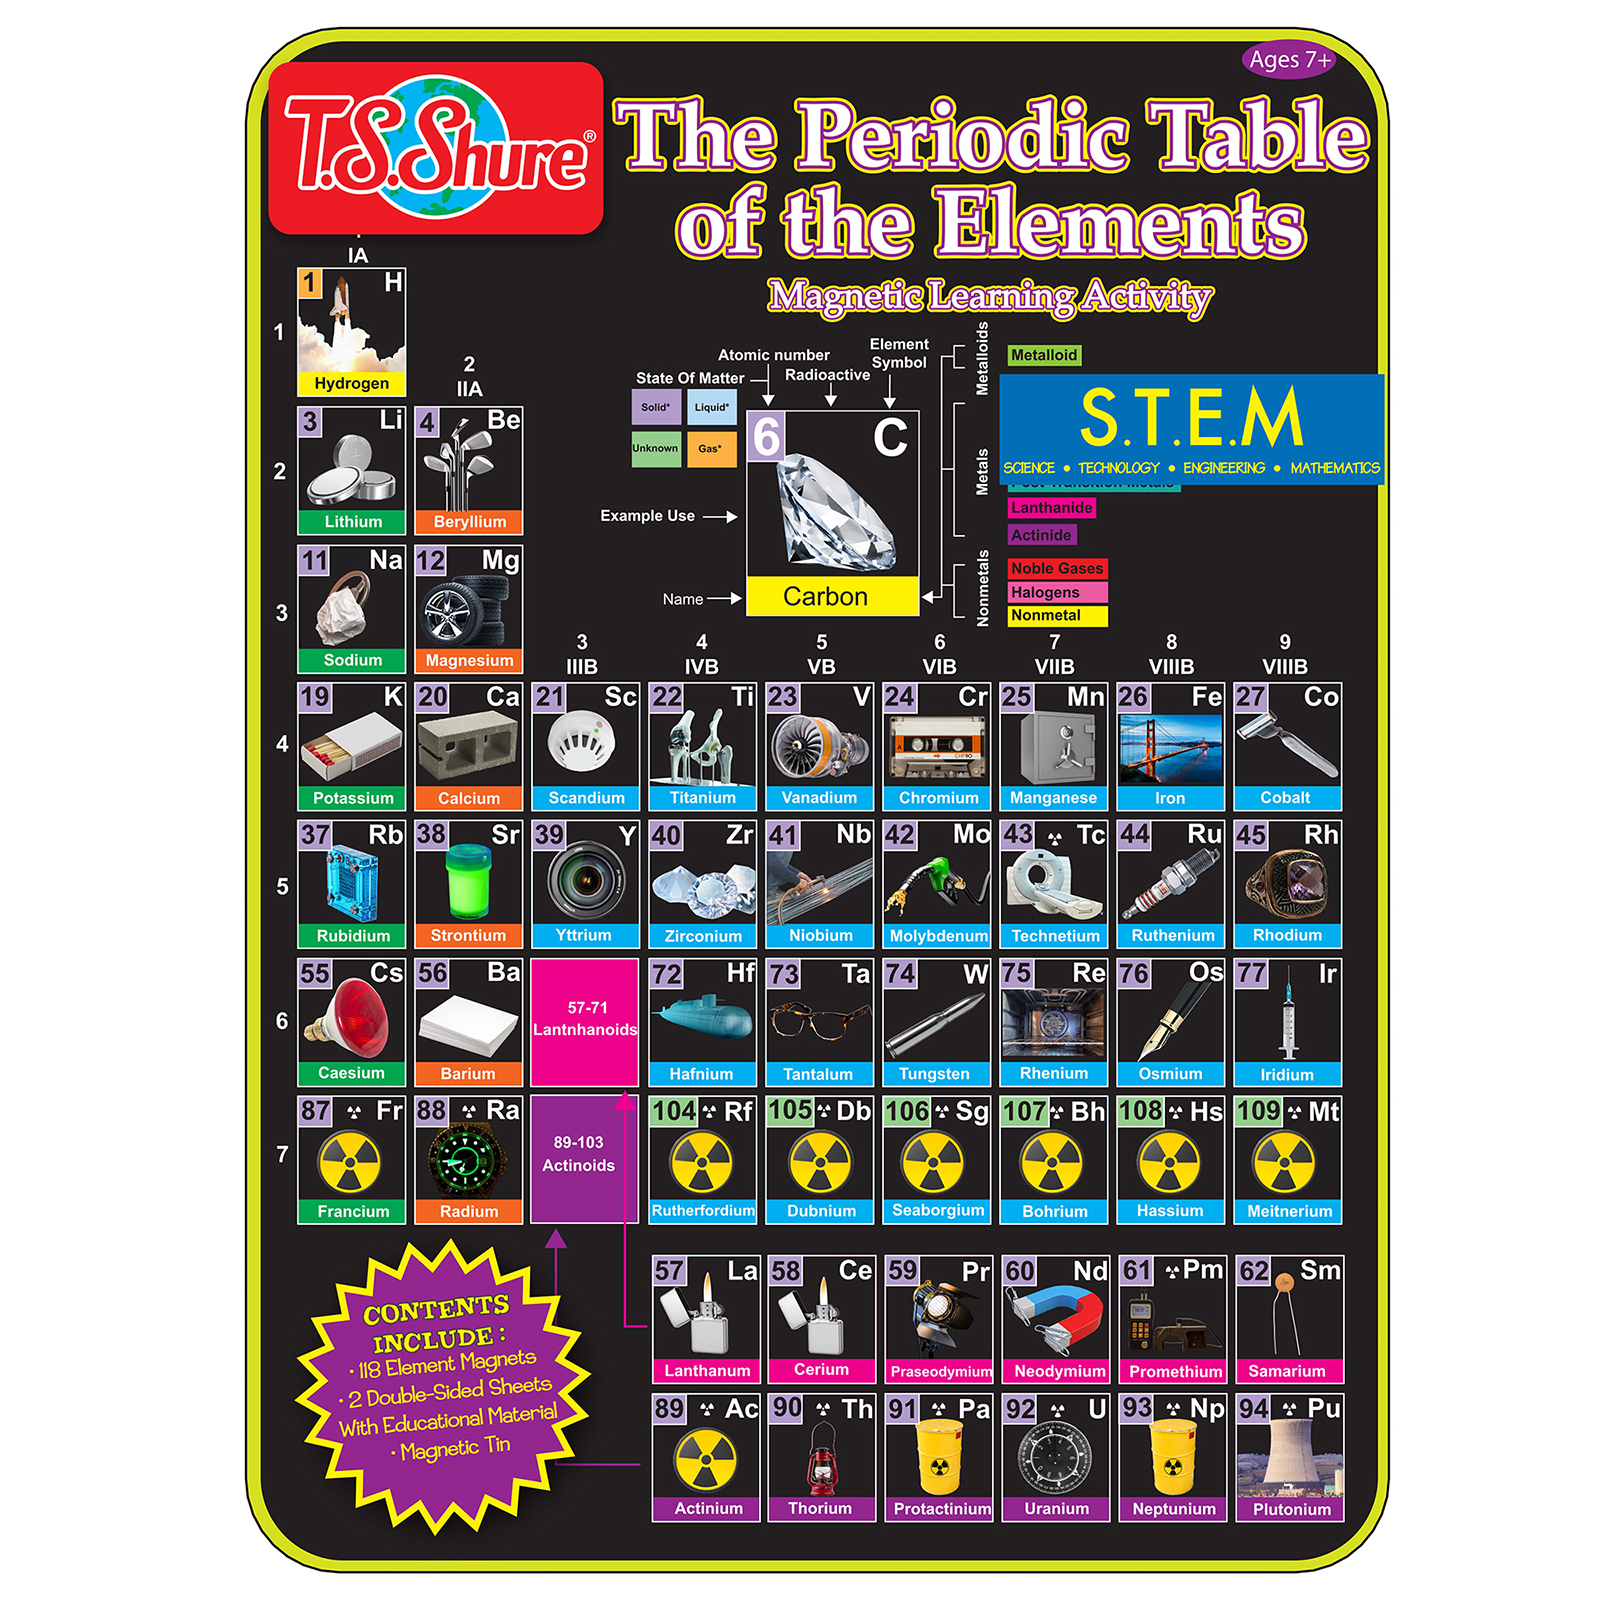 TS Shure The Periodic Table of Elements Magnetic Tin